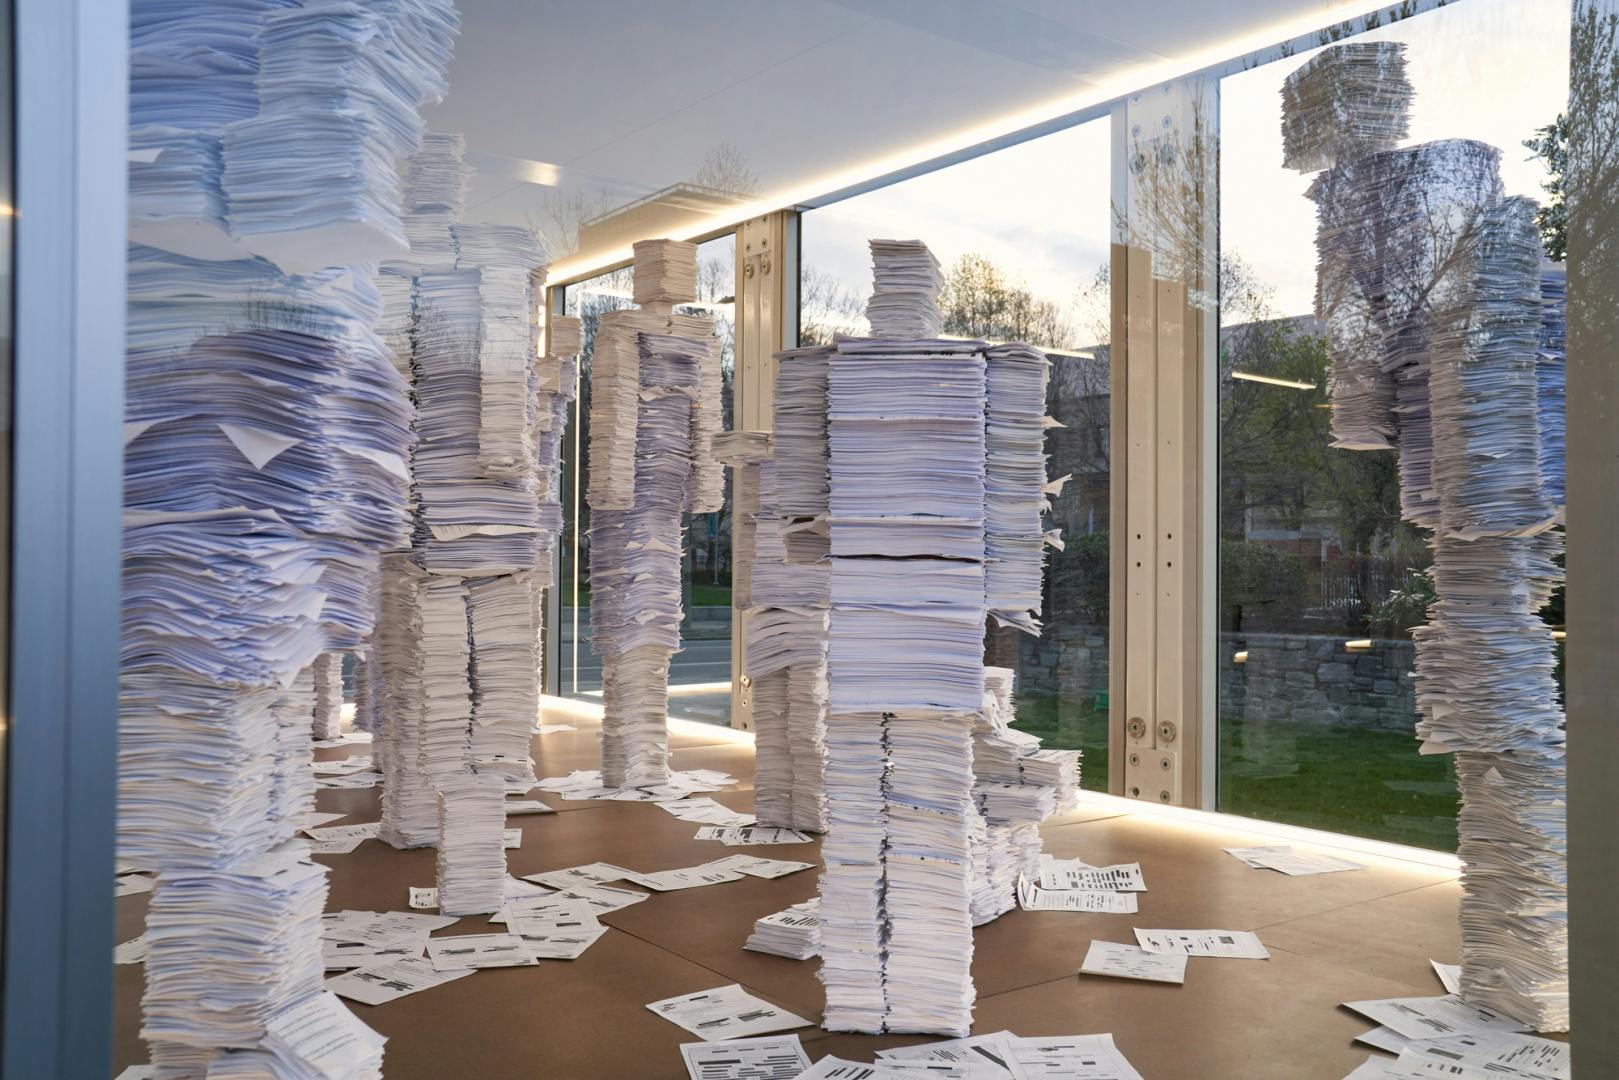 JPMorgan Chase's human-shaped installation of expungement papers